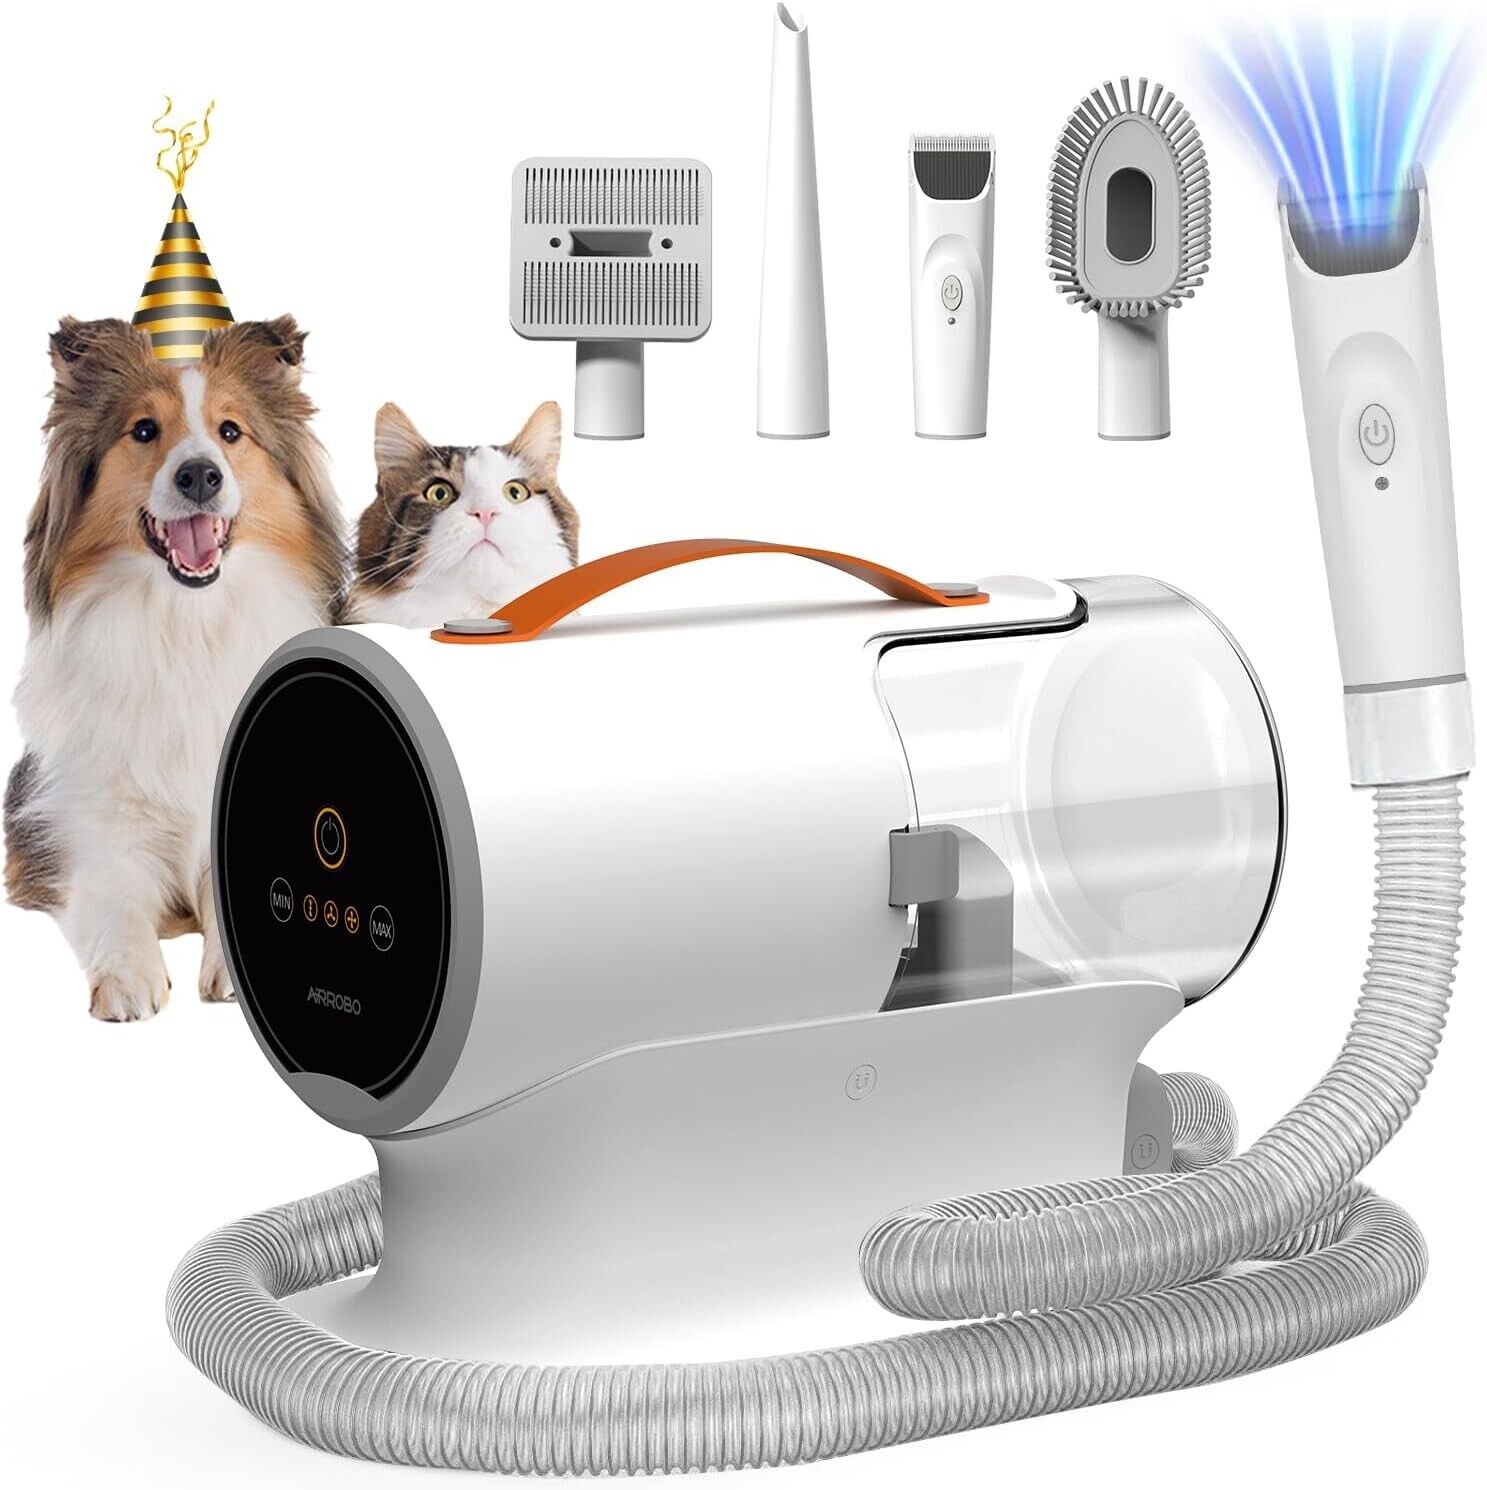 AIRROBO PG100 Pet Grooming Vacuum with 5 Grooming Tools, 12000Pa Suction Power